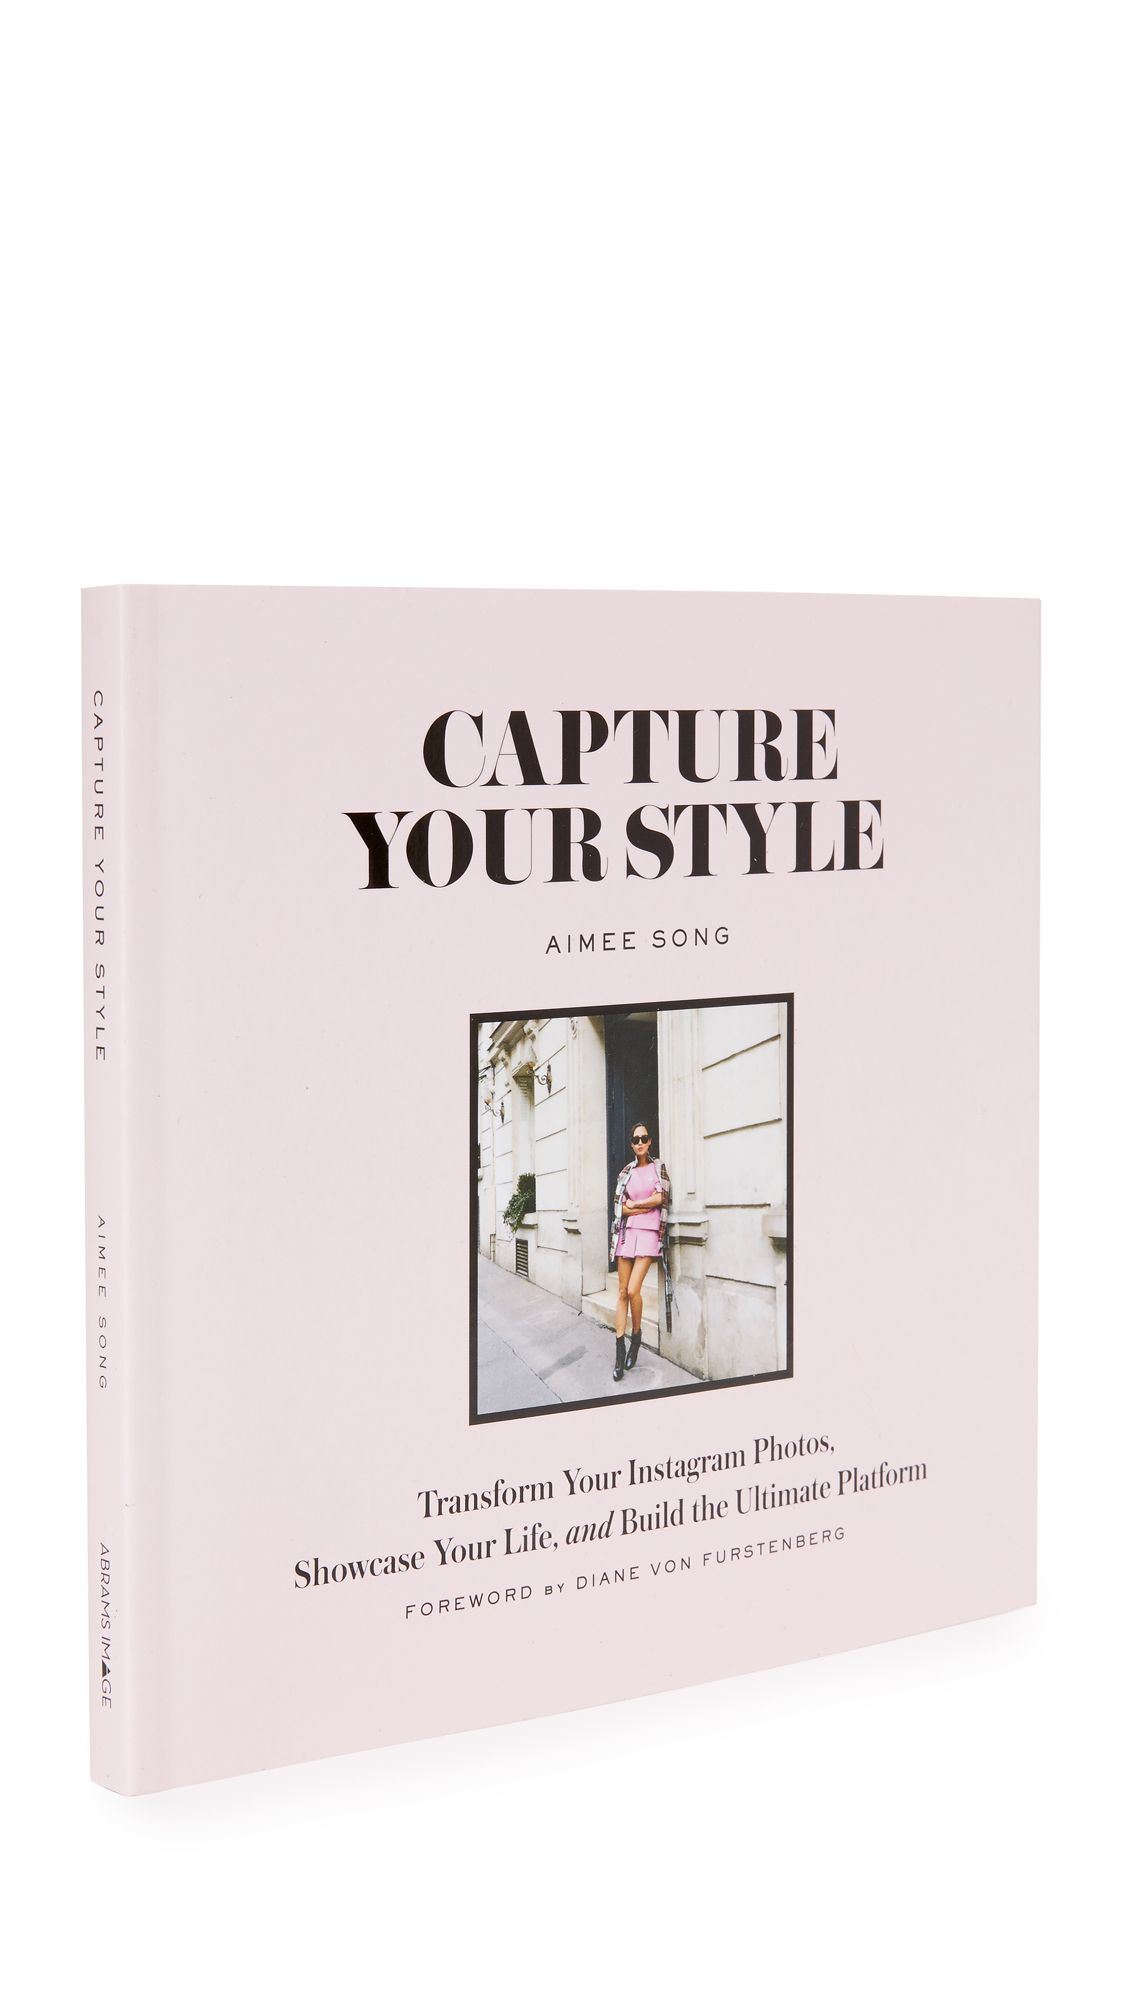 Capture Your Style: Aimee Song | Shopbop